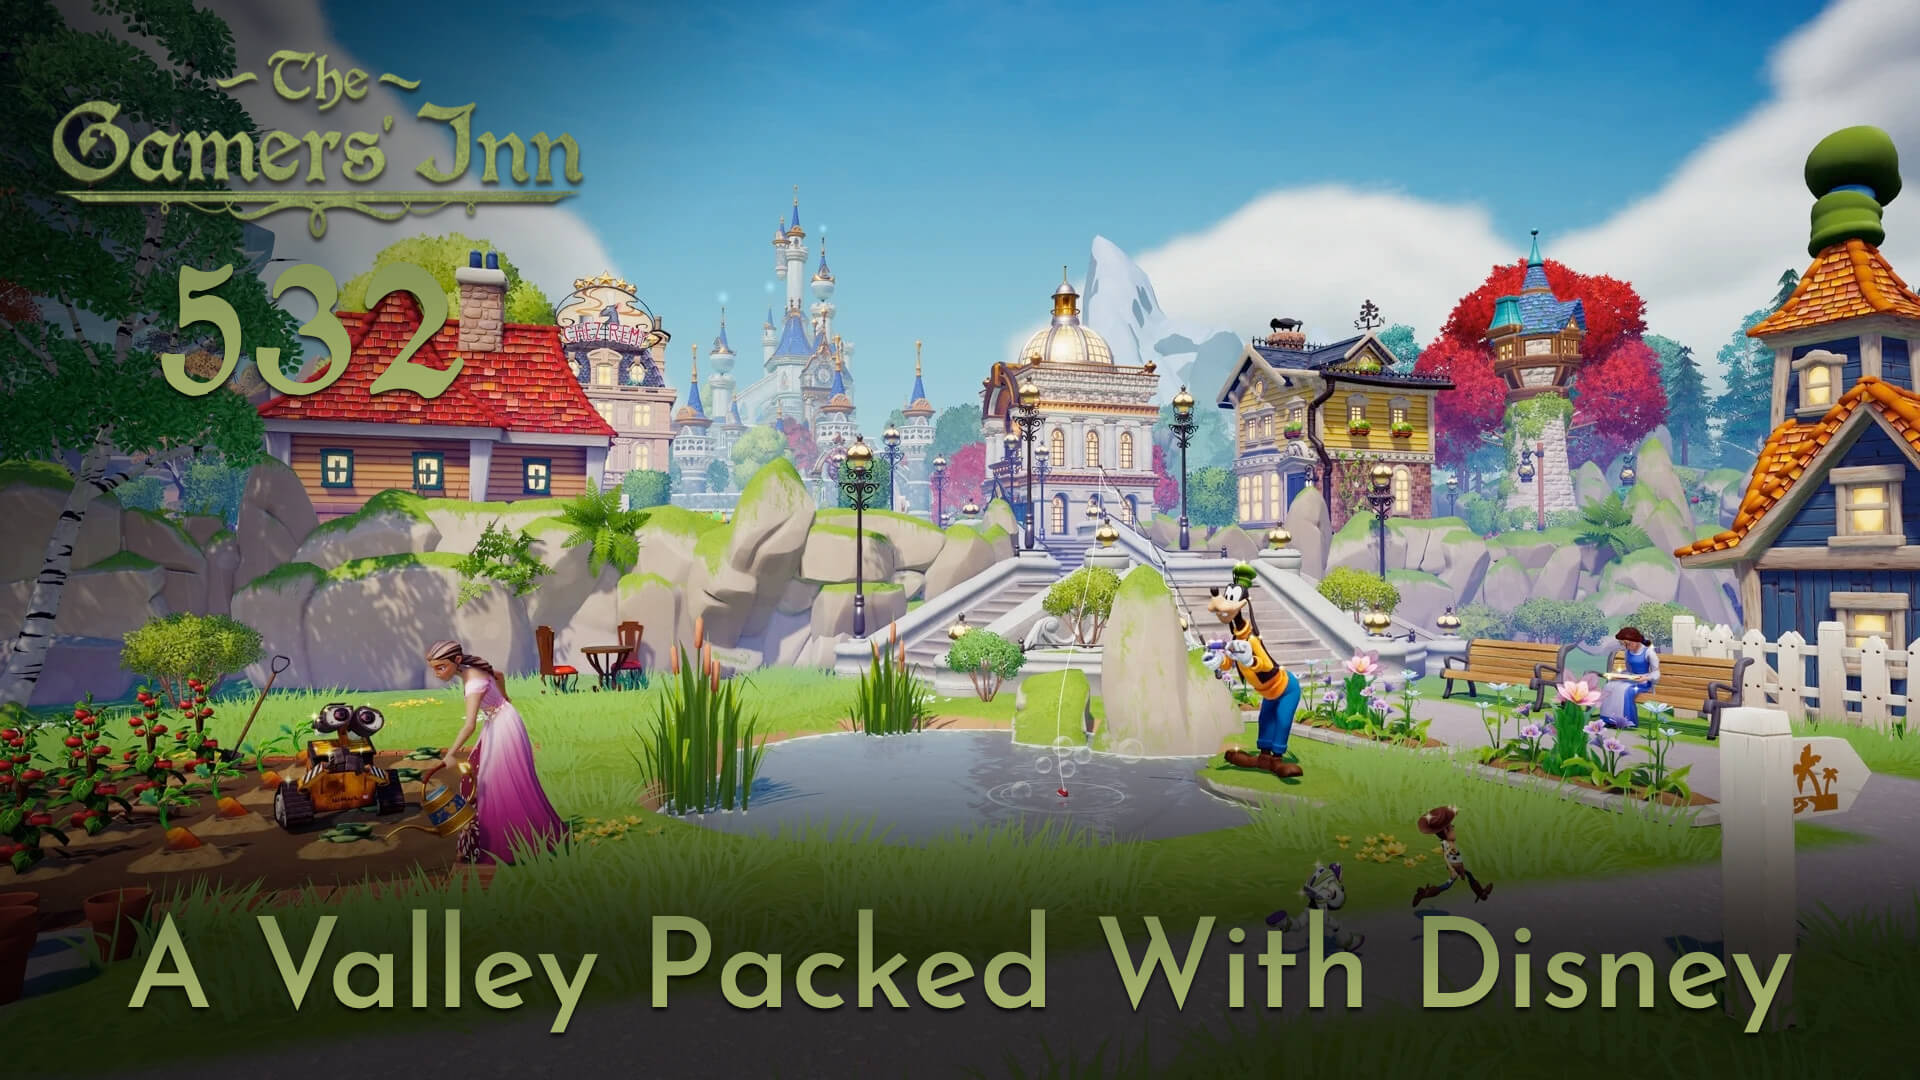 TGI 532 - A Valley Packed With Disney